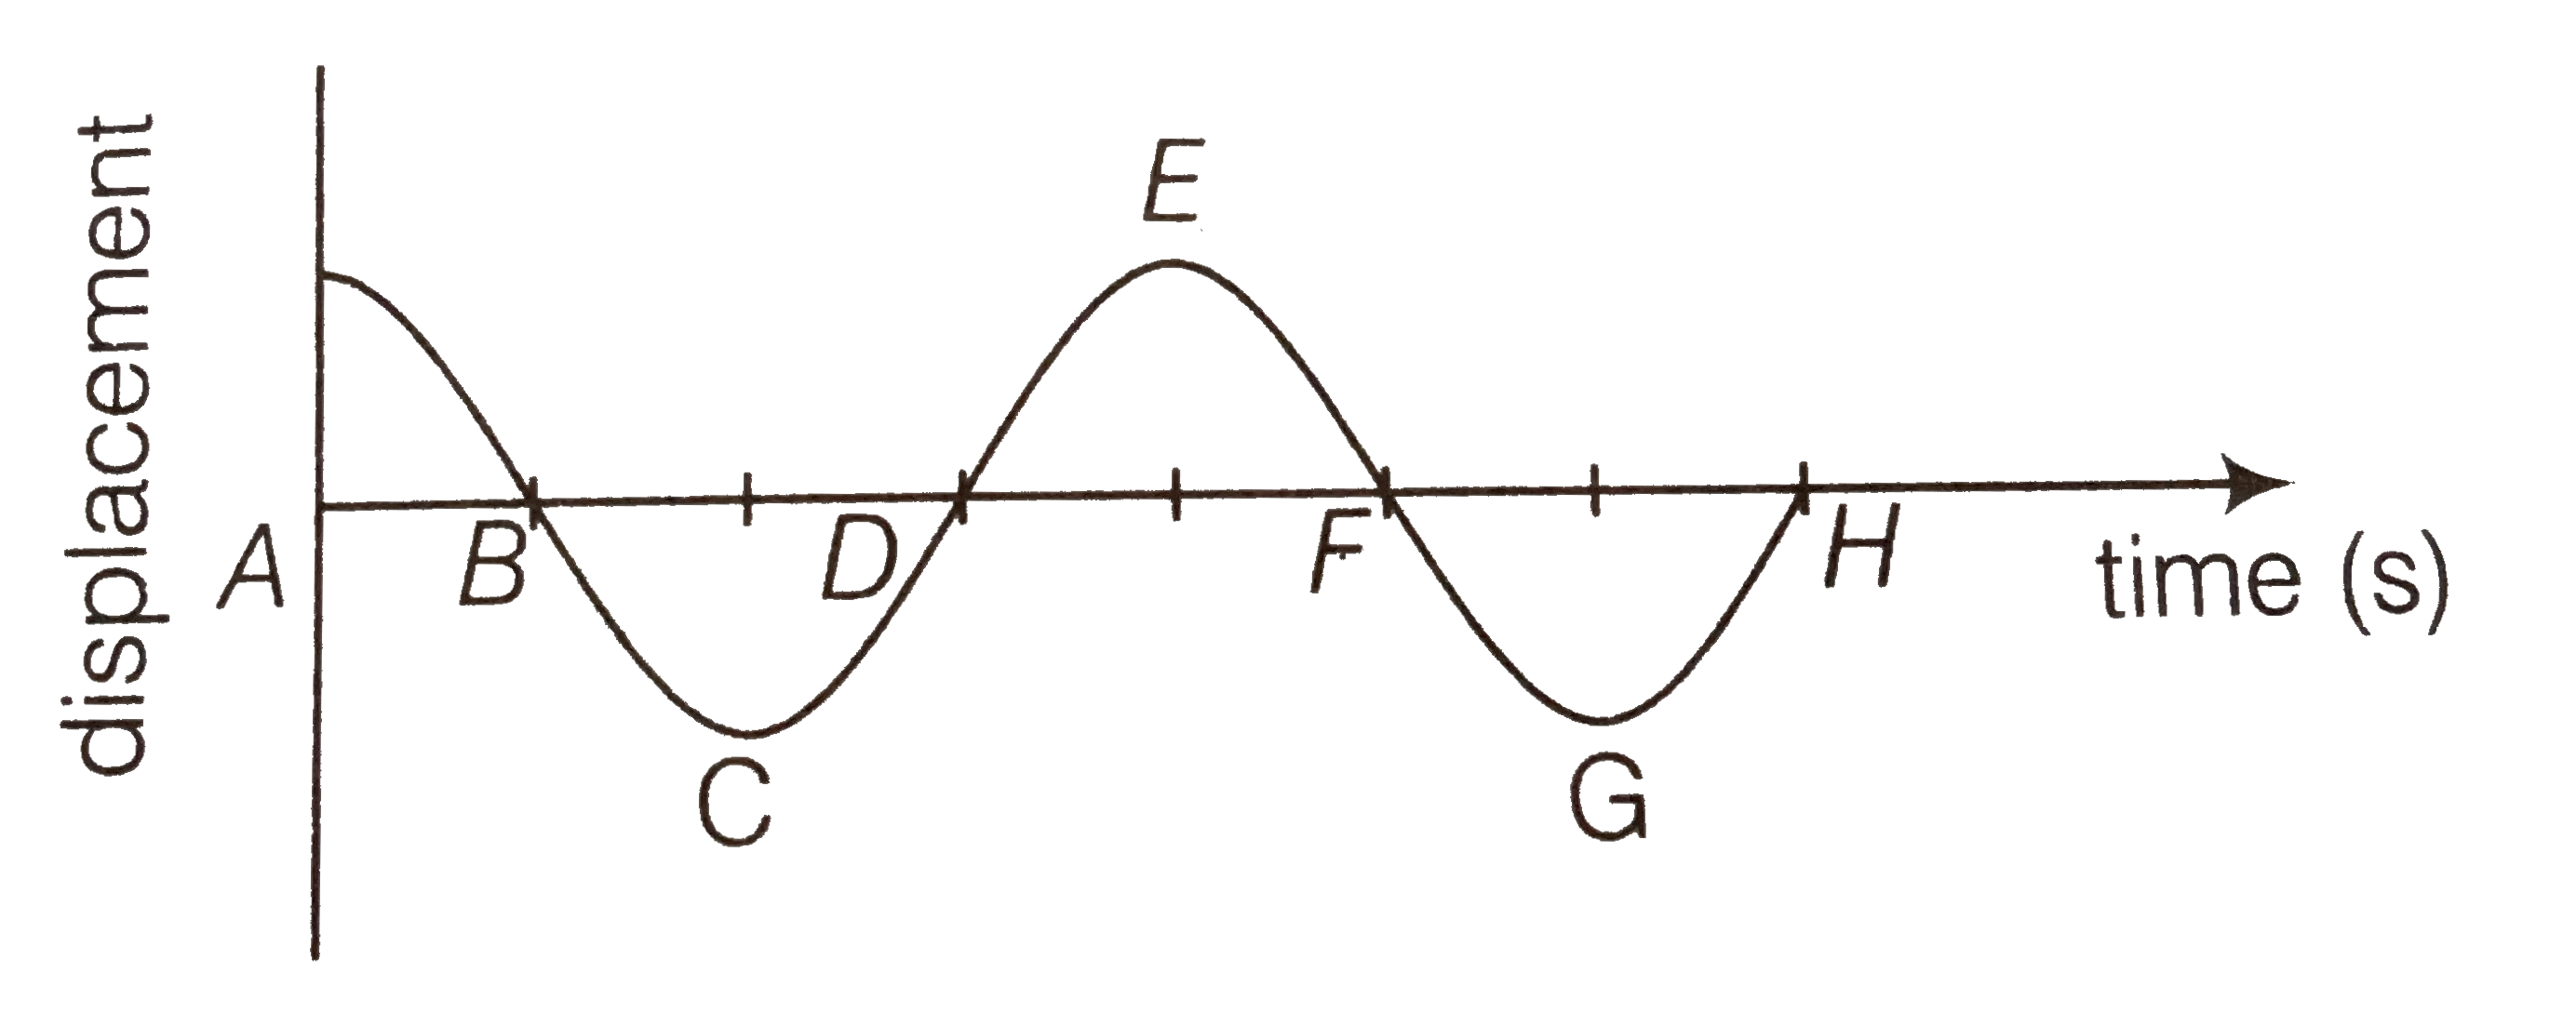 Displacement versus time curve for a particle executing SHM is shown in figure. Identify the points marked at which   (i) velocity of the oscillator is zero,  
(ii) speed of the oscillator is maximum.